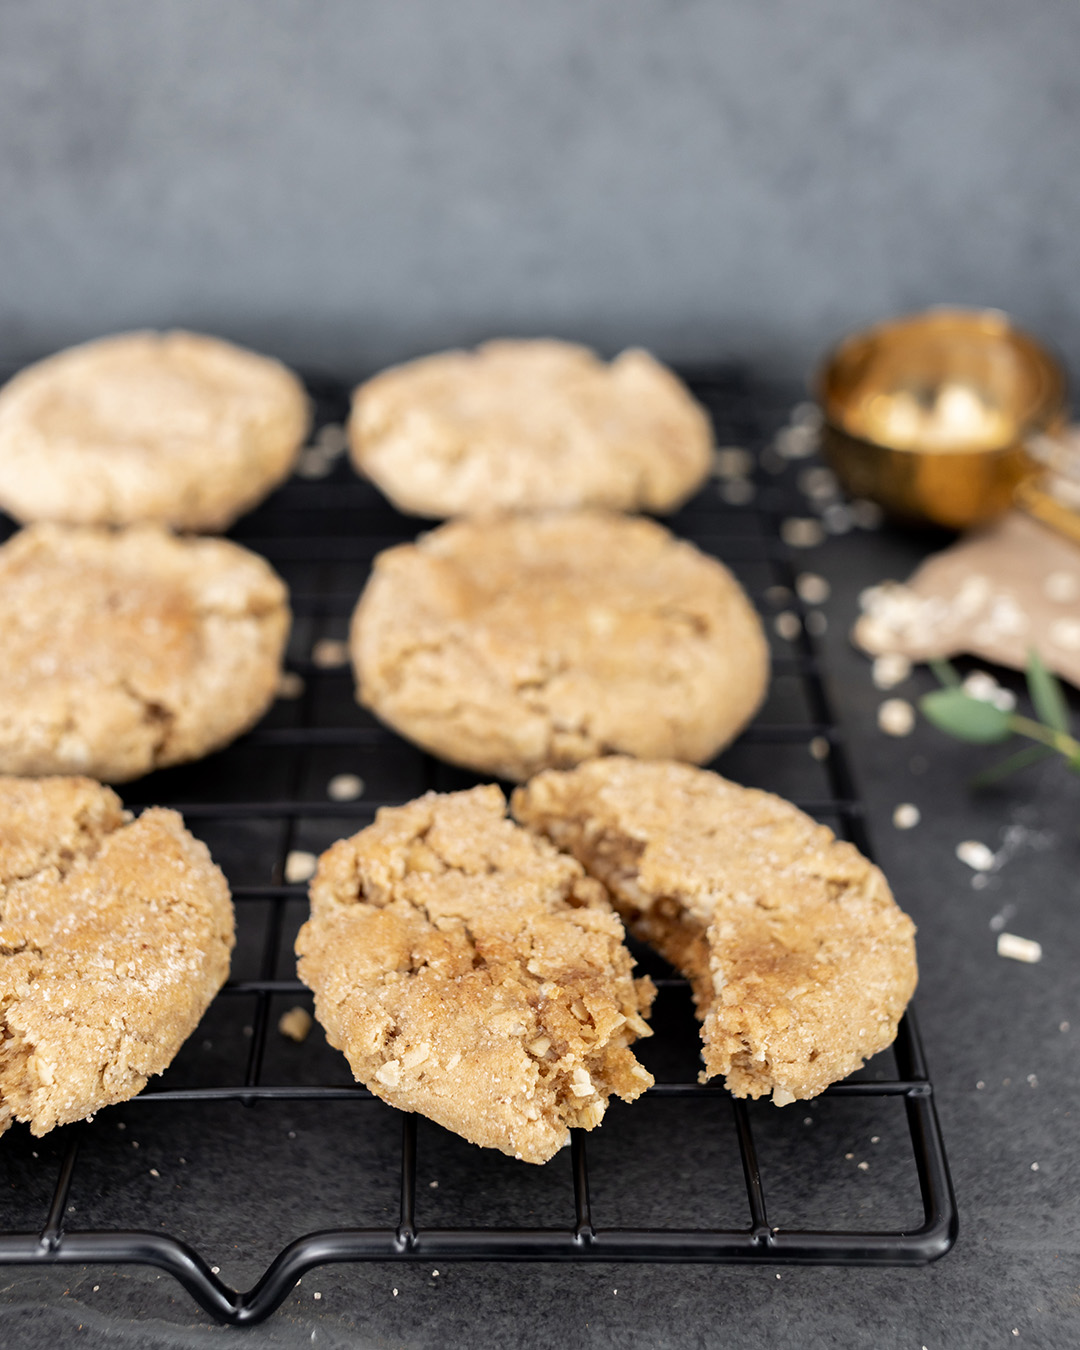 This is the recipe I've been trying to come up with for years and I've finally perfected it! These are truly the best soft and chewy oatmeal cookies.